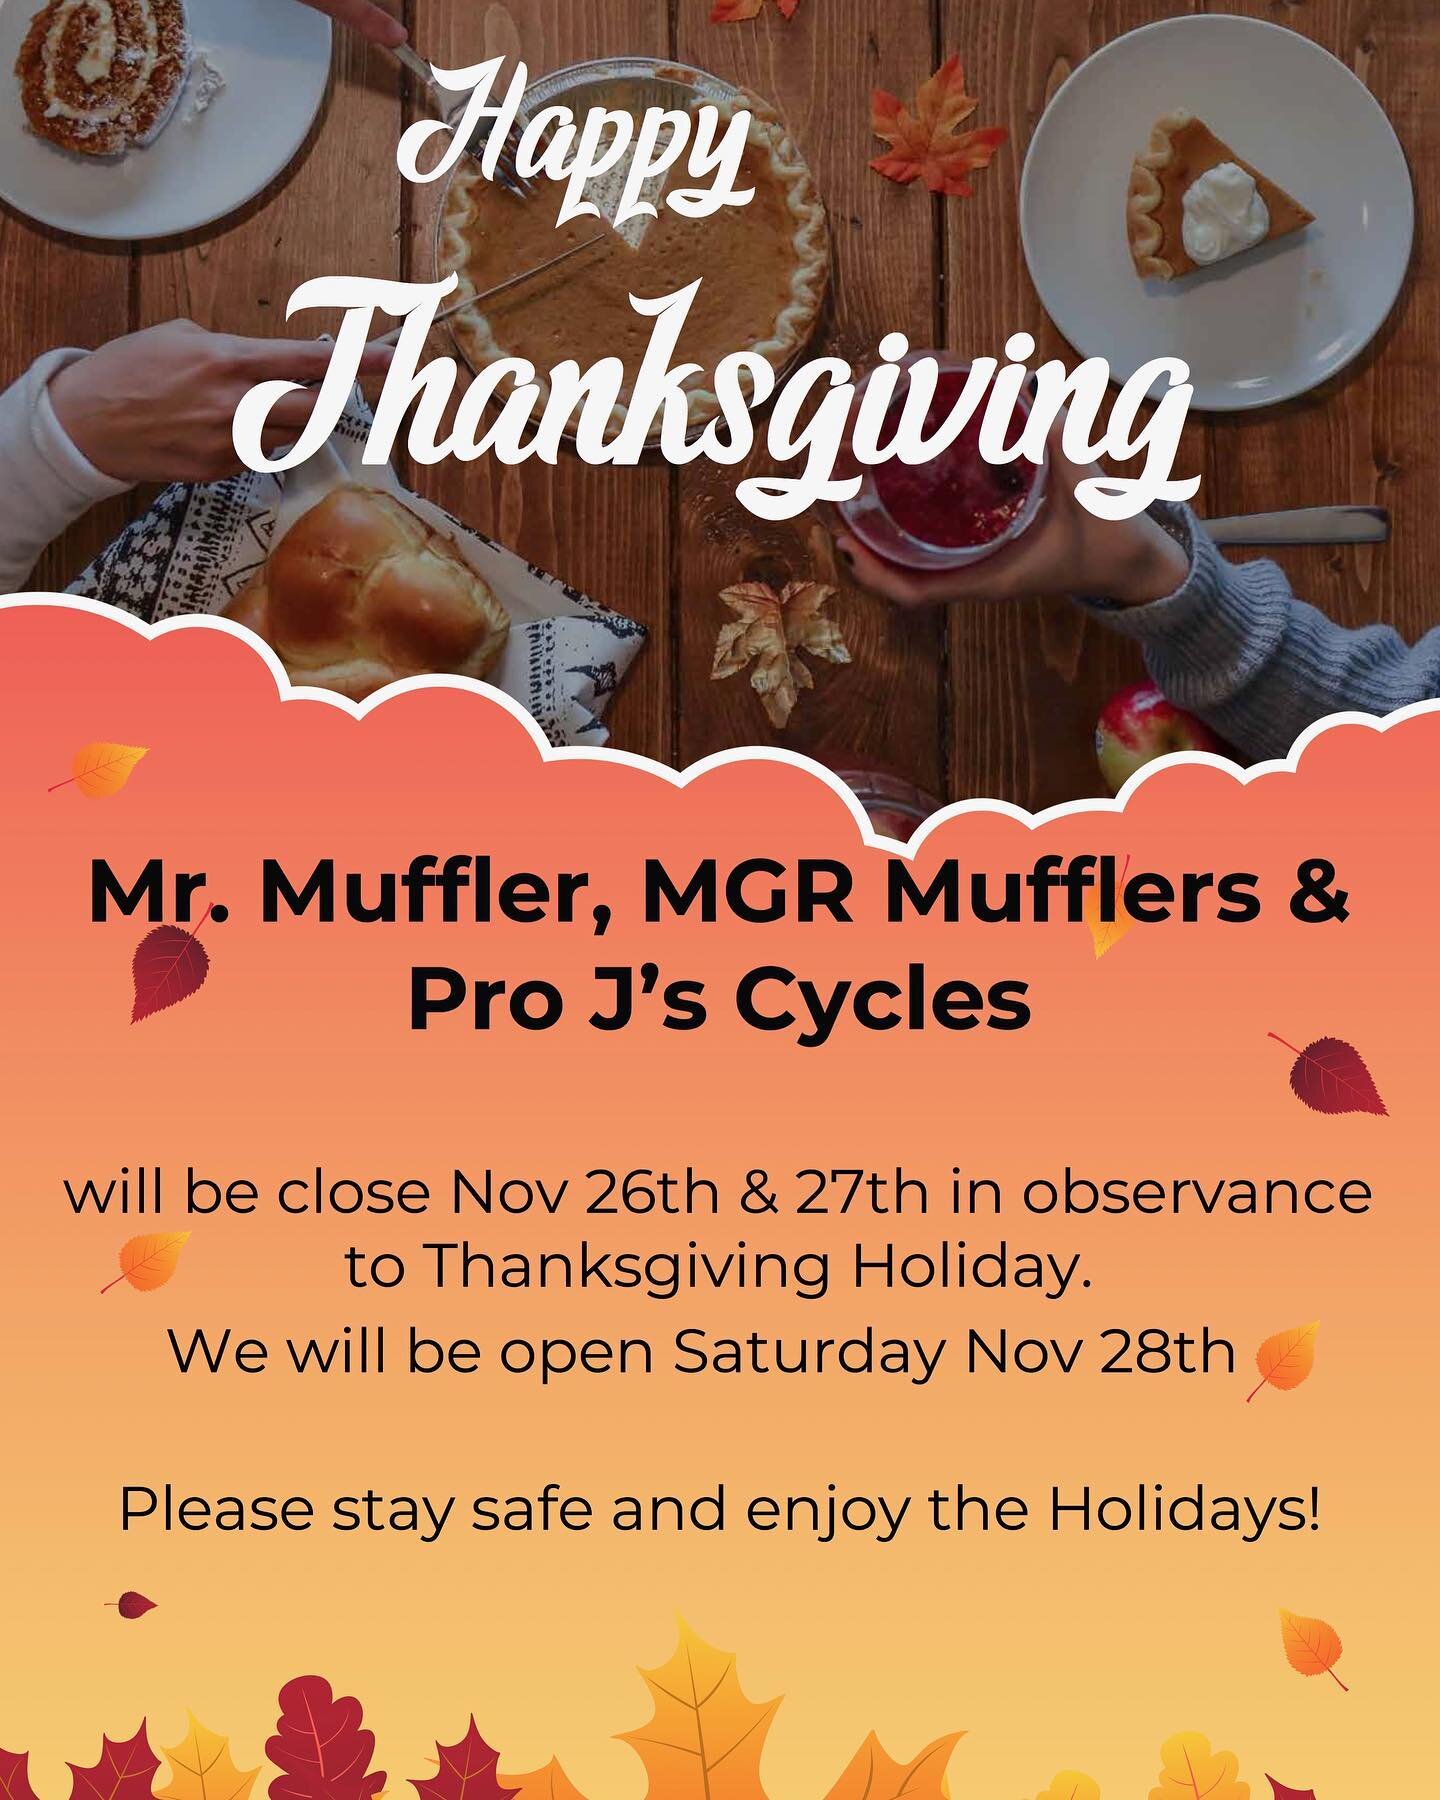 Our shops will be close Nov 26th &amp; 27th, in observance of the Thanksgiving Holiday.  We will reopen Saturday, Nov 28th.  We wish everyone a Happy and Safe Holiday.